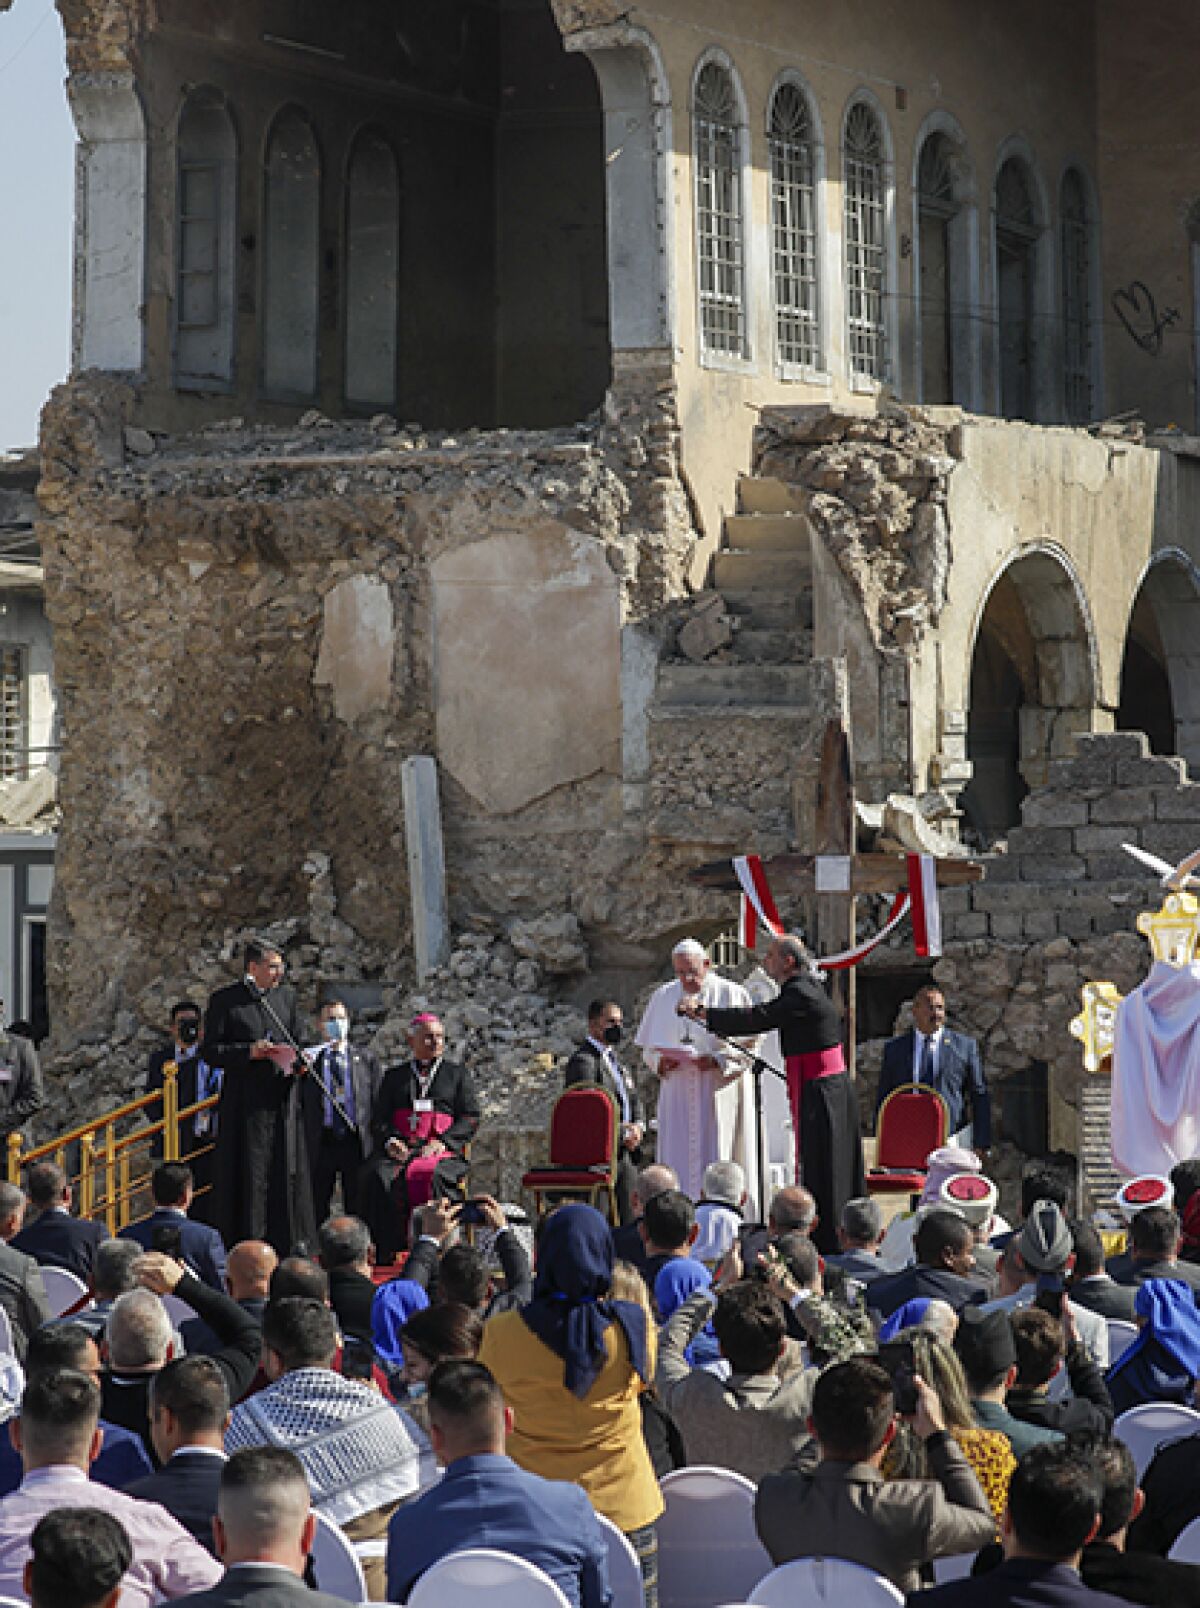 The pope speaks to a group of people in front of the ruins of a building.